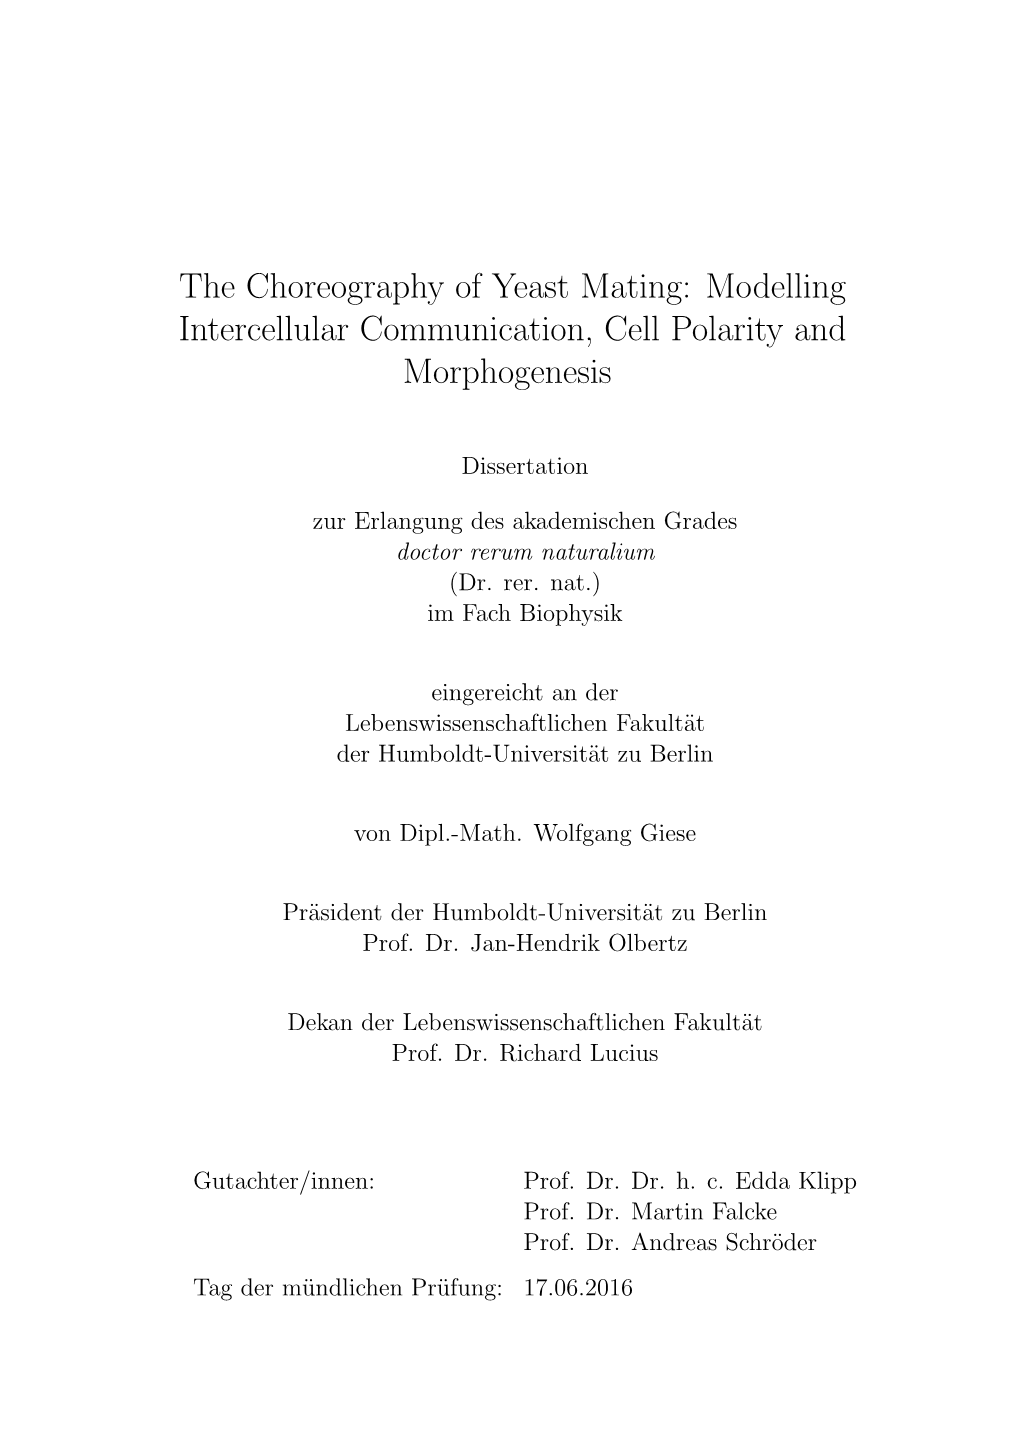 The Choreography of Yeast Mating: Modelling Intercellular Communication, Cell Polarity and Morphogenesis